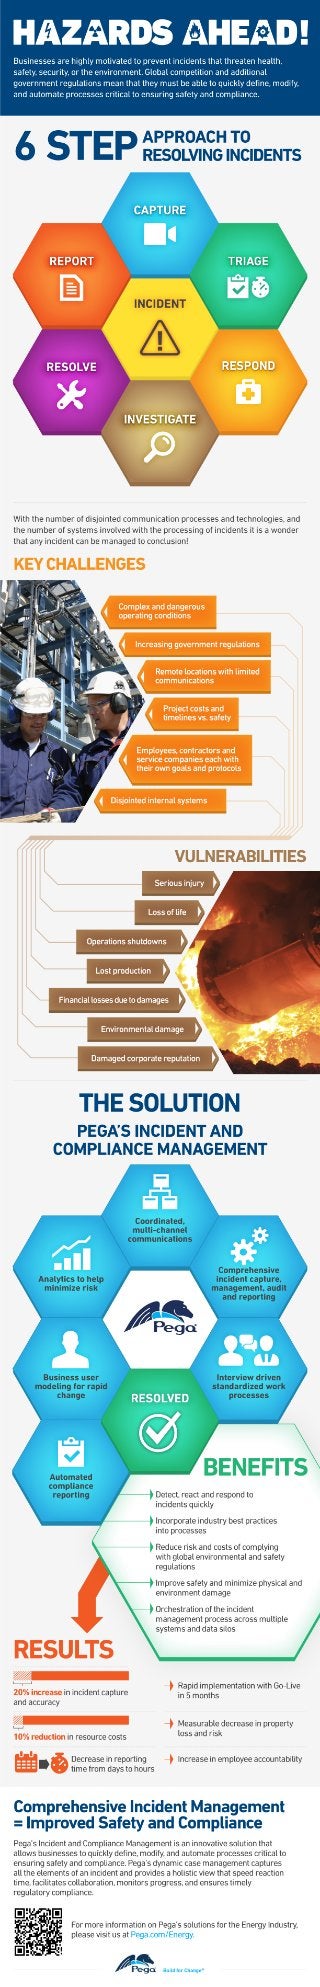 6 Step Approach to Resolving Incidents Infographic